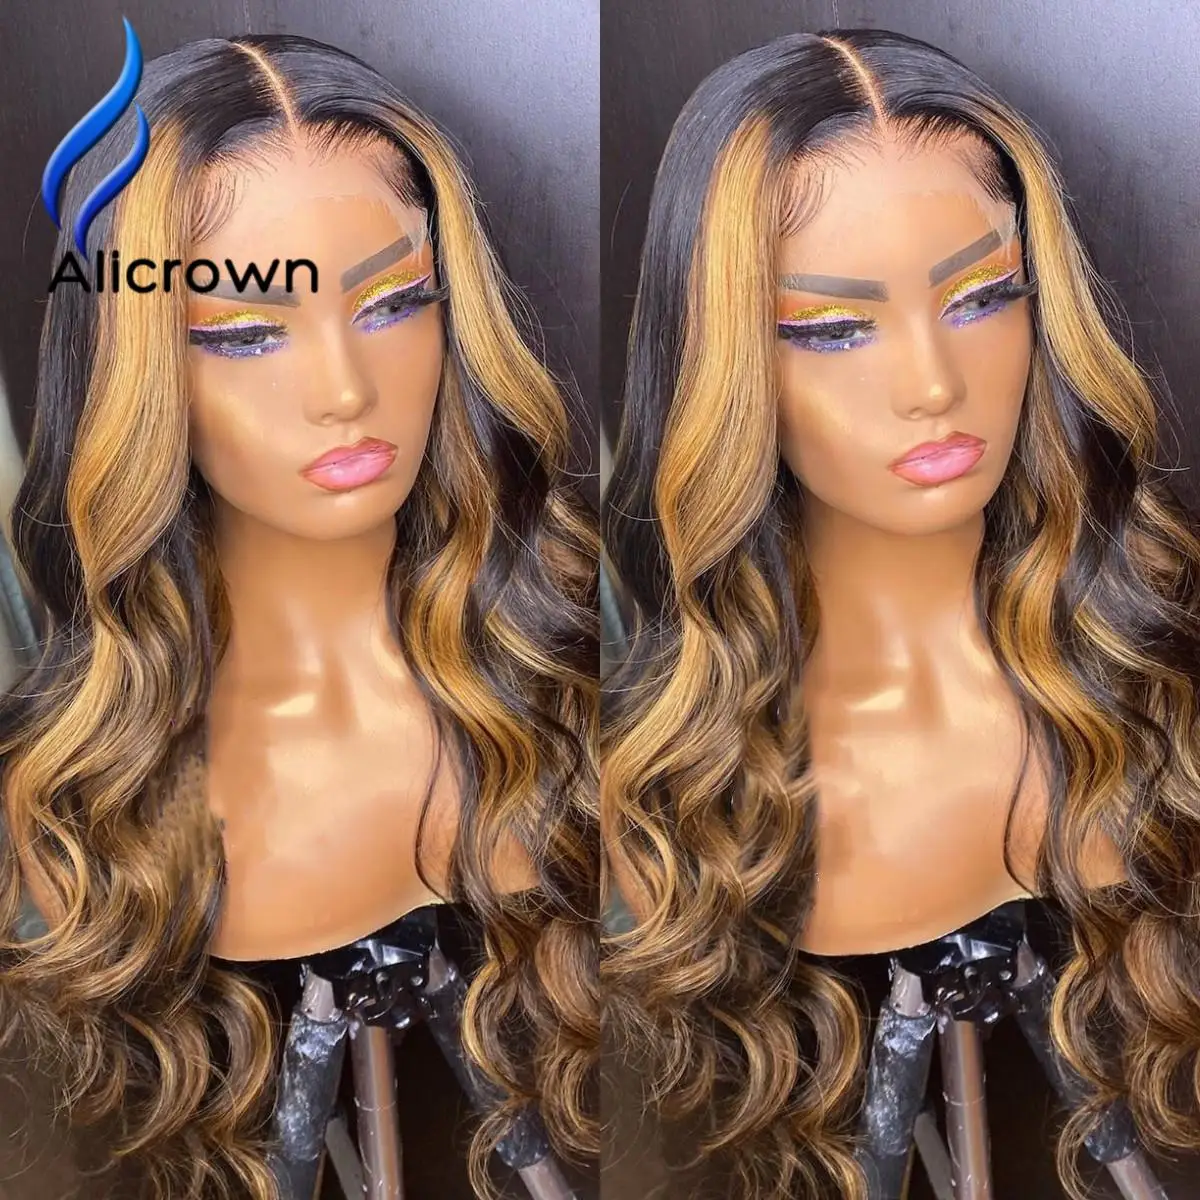 Alicrown Highlight Wig Brazilian Body Wave Lace Front Human Hair Wigs 13x4 Frontal Wig Brown Colored Human Hair Wigs Pre-Plucked